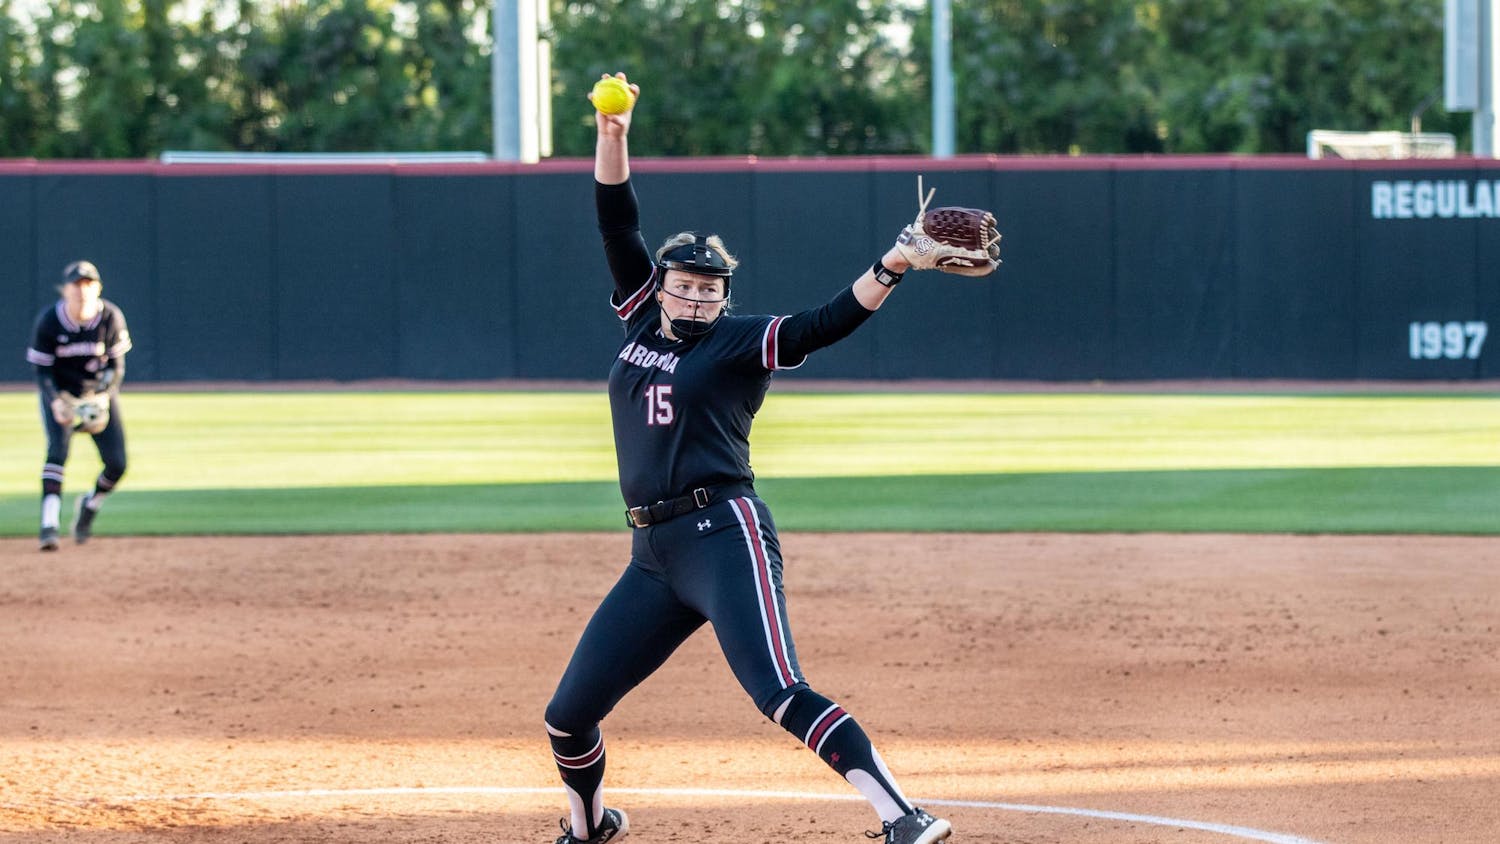 Fifth-year pitcher Alana Vawter winds up a pitch during South Carolina's game against Arkansas at Beckham Field on April 12, 2024. Vawter faced 29 batters in the Gamecocks' 4-3 loss to the Razorbacks.